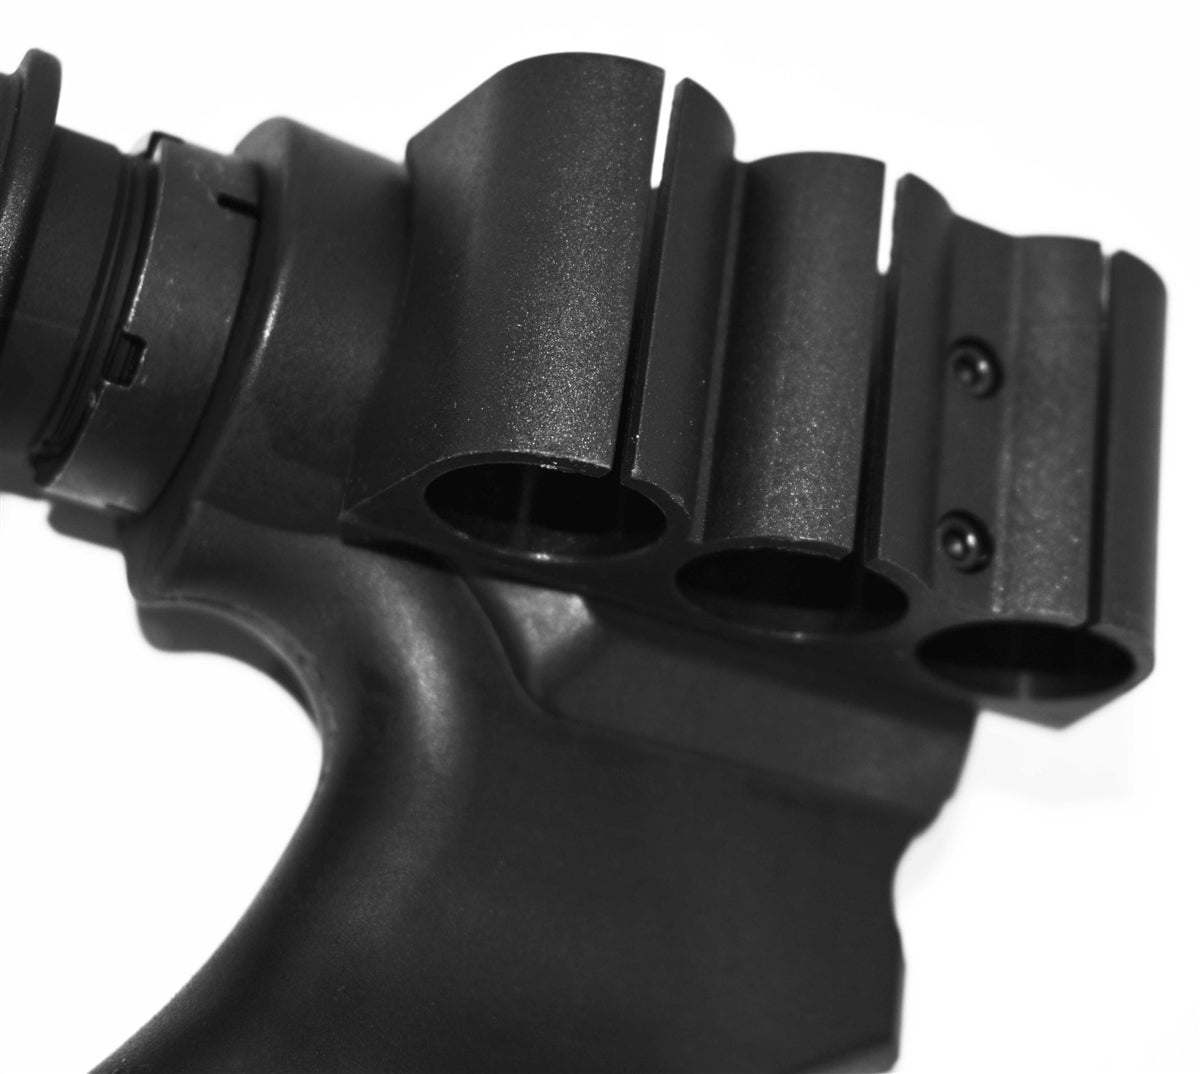 Tactical Adjustable Stock With Shell Holder Compatible With Remington 870 tac-14 12 gauge pump. - TRINITY SUPPLY INC